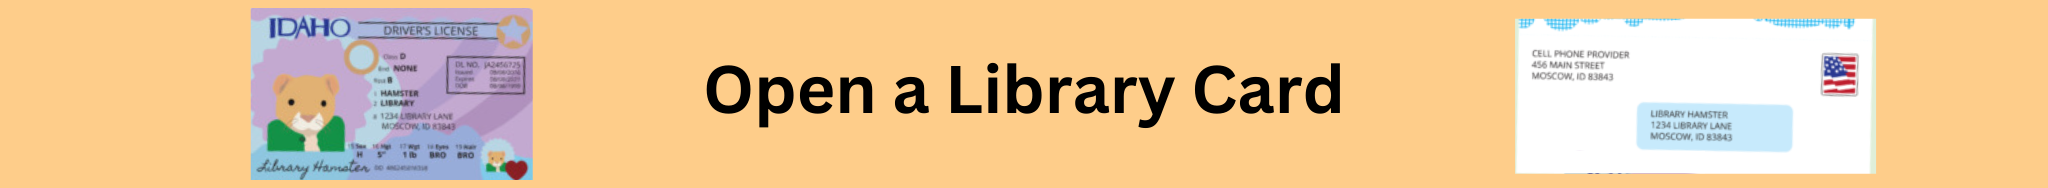 Open a Library Card